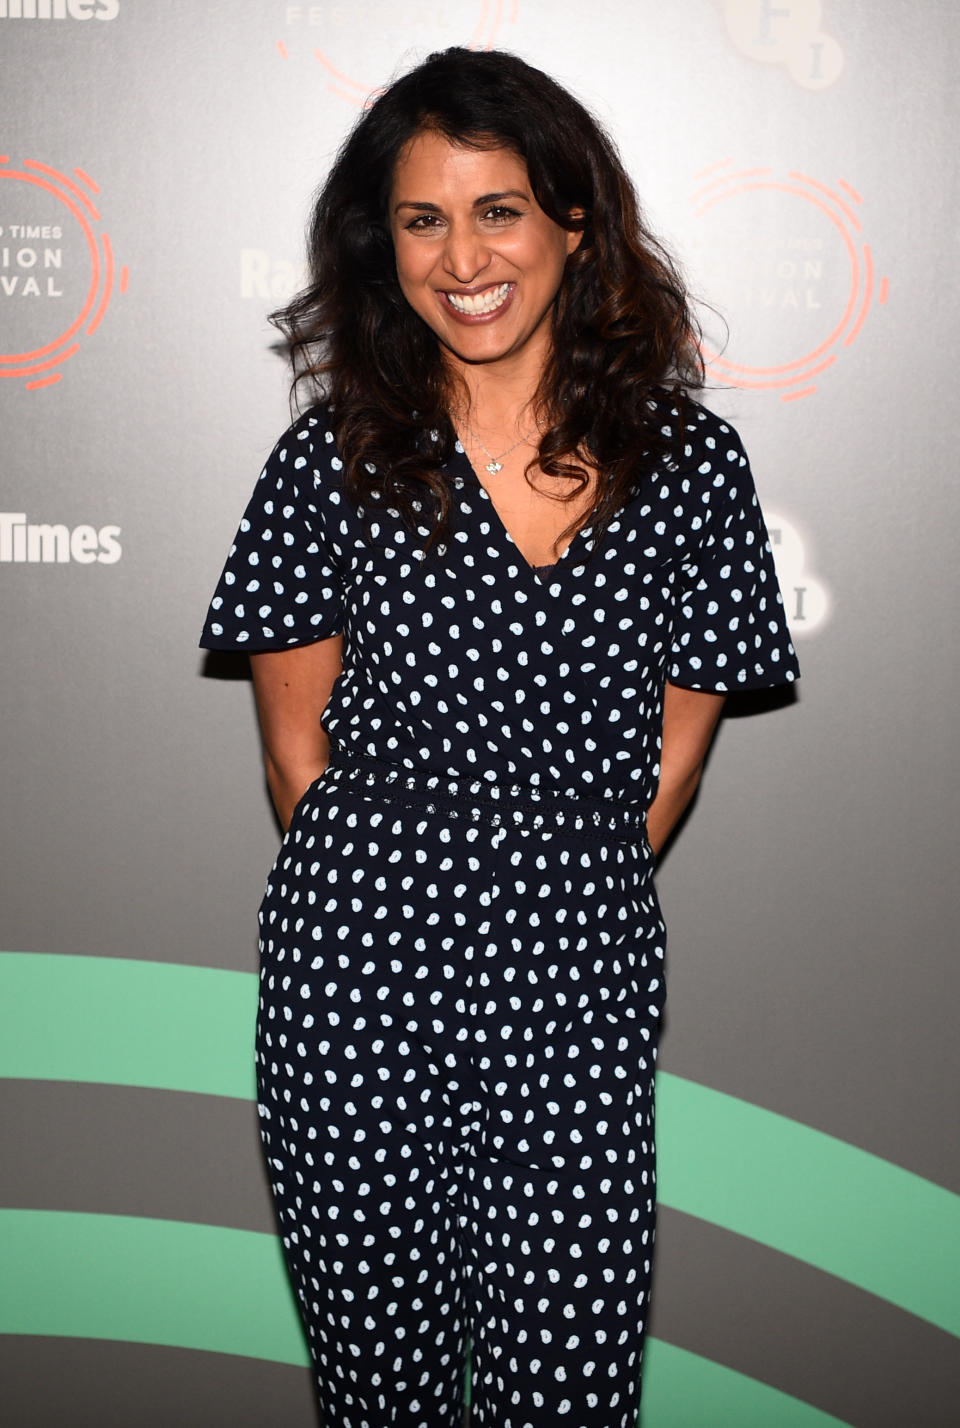 Maya Sondhi at a photo call for Line of Duty, during the BFI and Radio Times Television Festival at the BFI Southbank, London. (Photo by Kirsty O'Connor/PA Images via Getty Images)